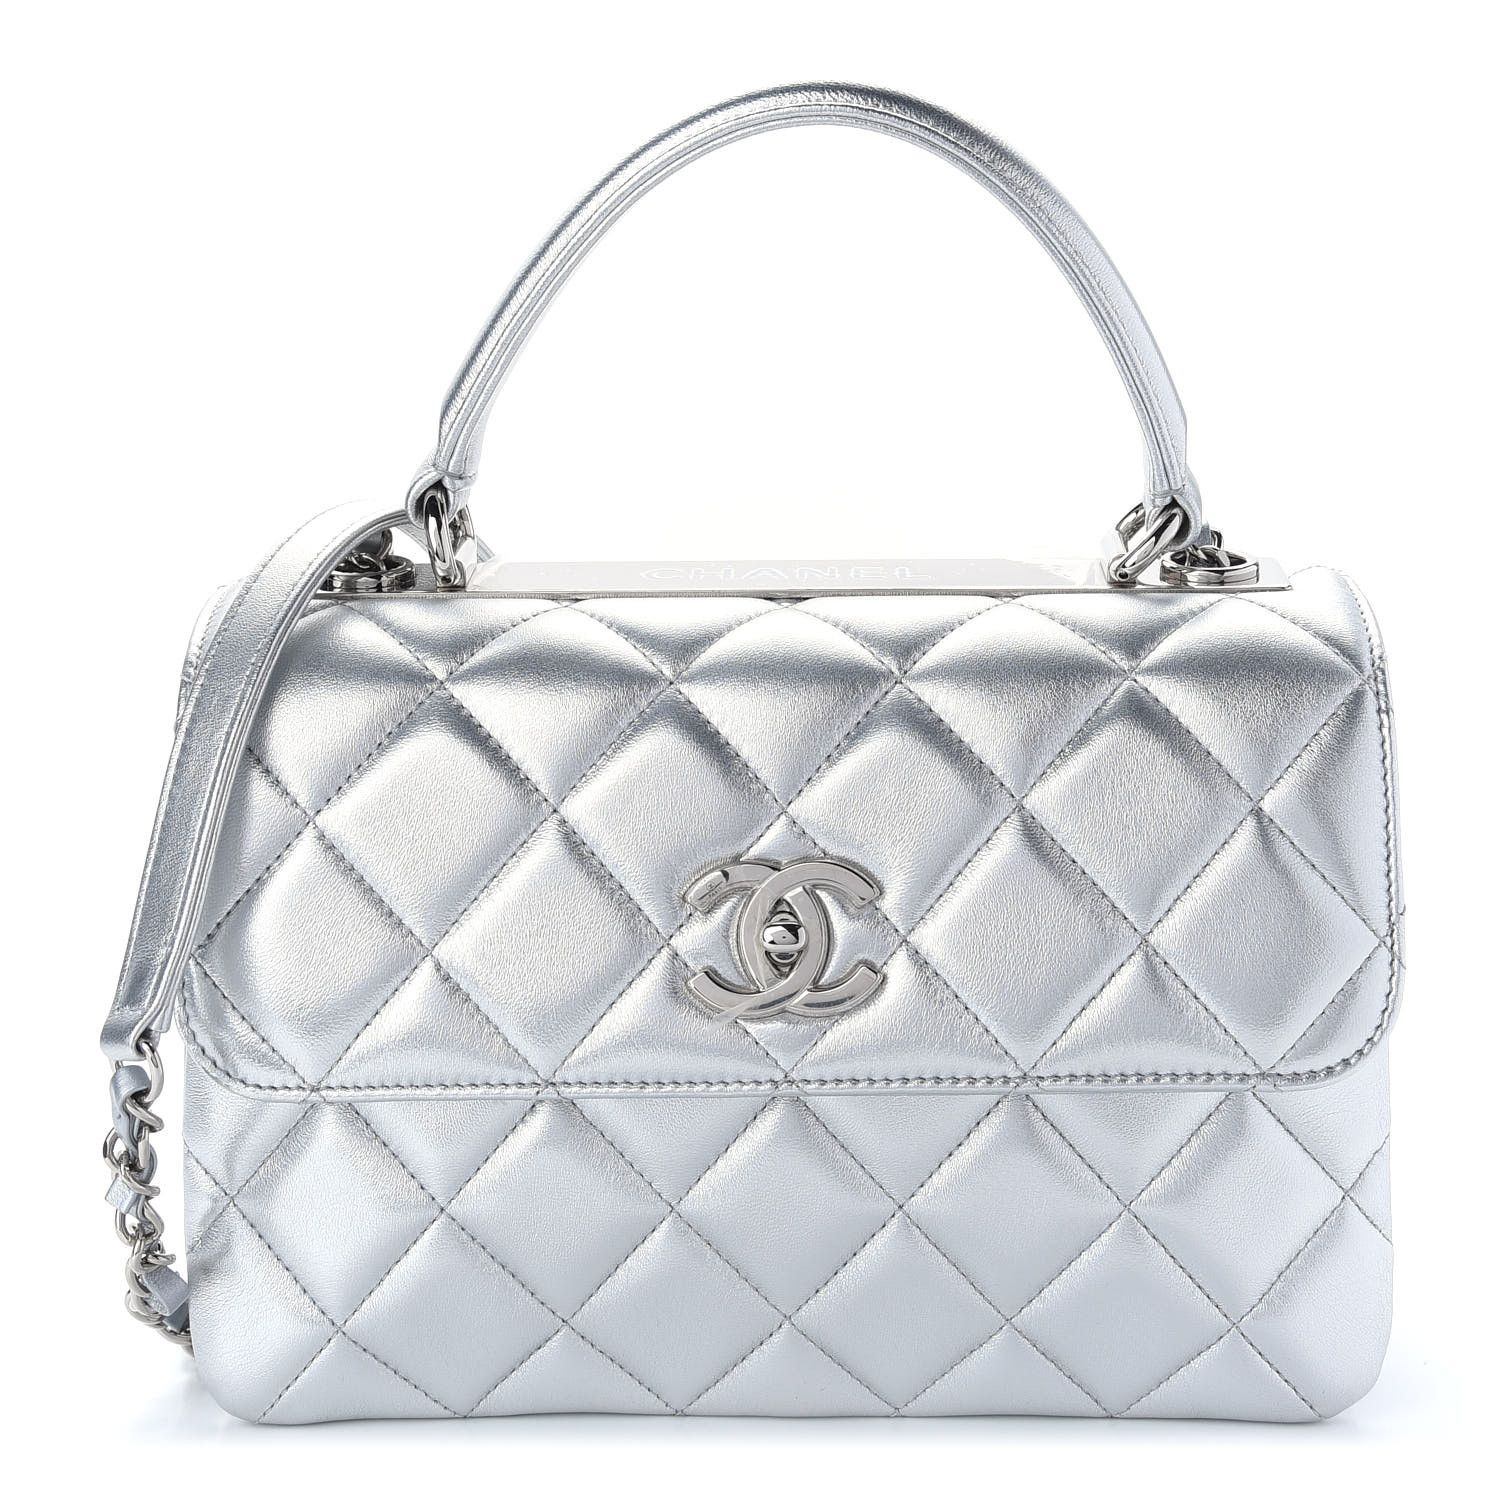 CHANEL

Metallic Lambskin Quilted Small Trendy CC Flap Dual Handle Bag Silver | Fashionphile